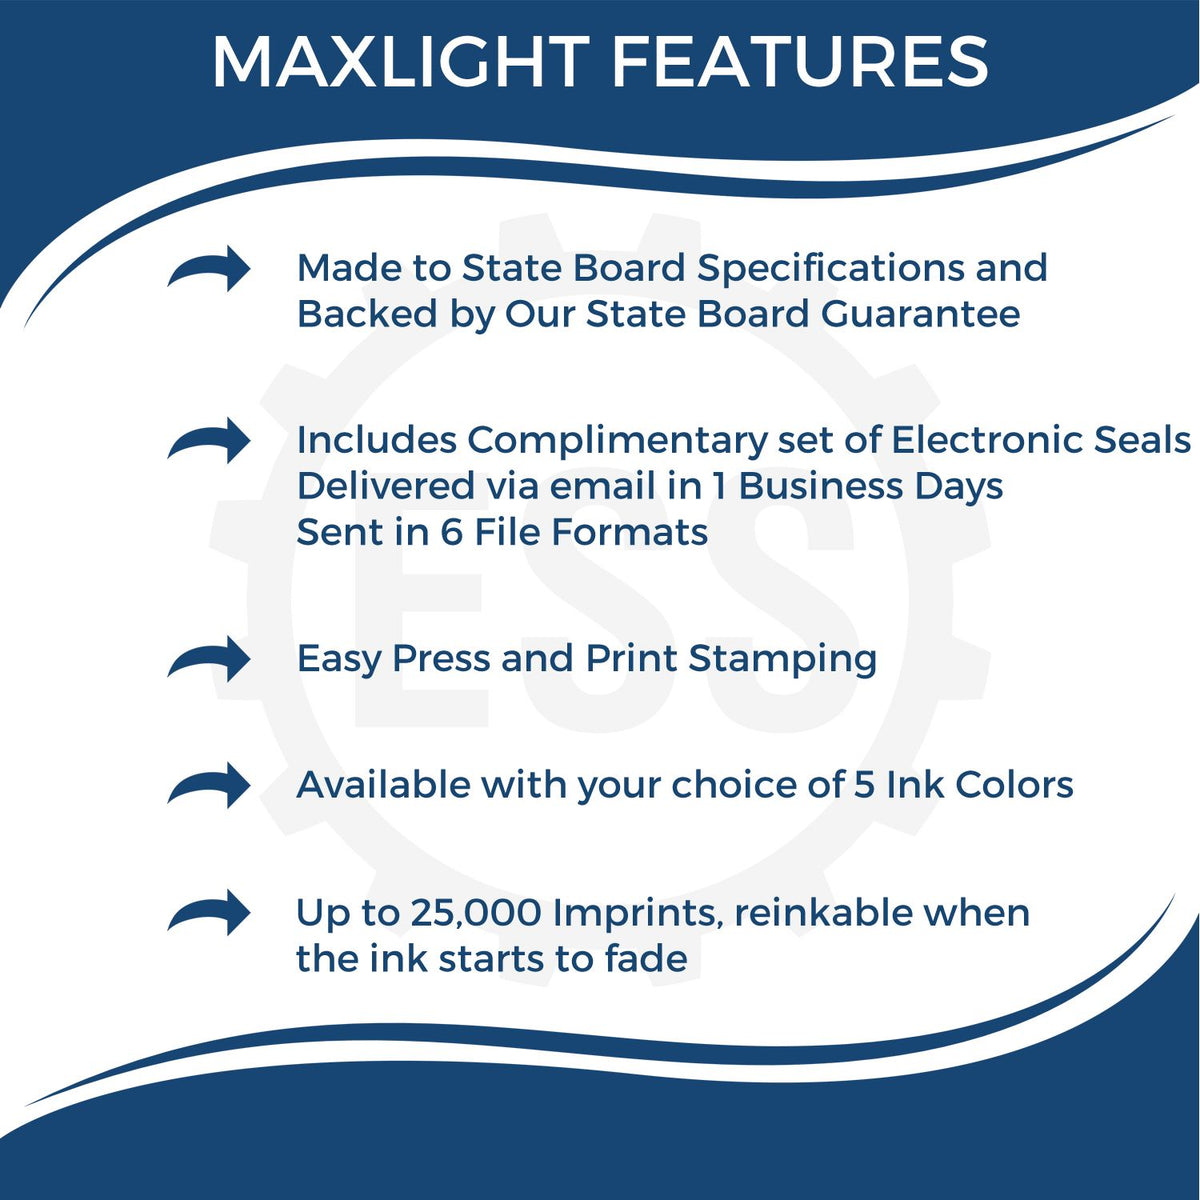 A picture of an infographic highlighting the selling points for the Premium MaxLight Pre-Inked Hawaii Landscape Architectural Stamp